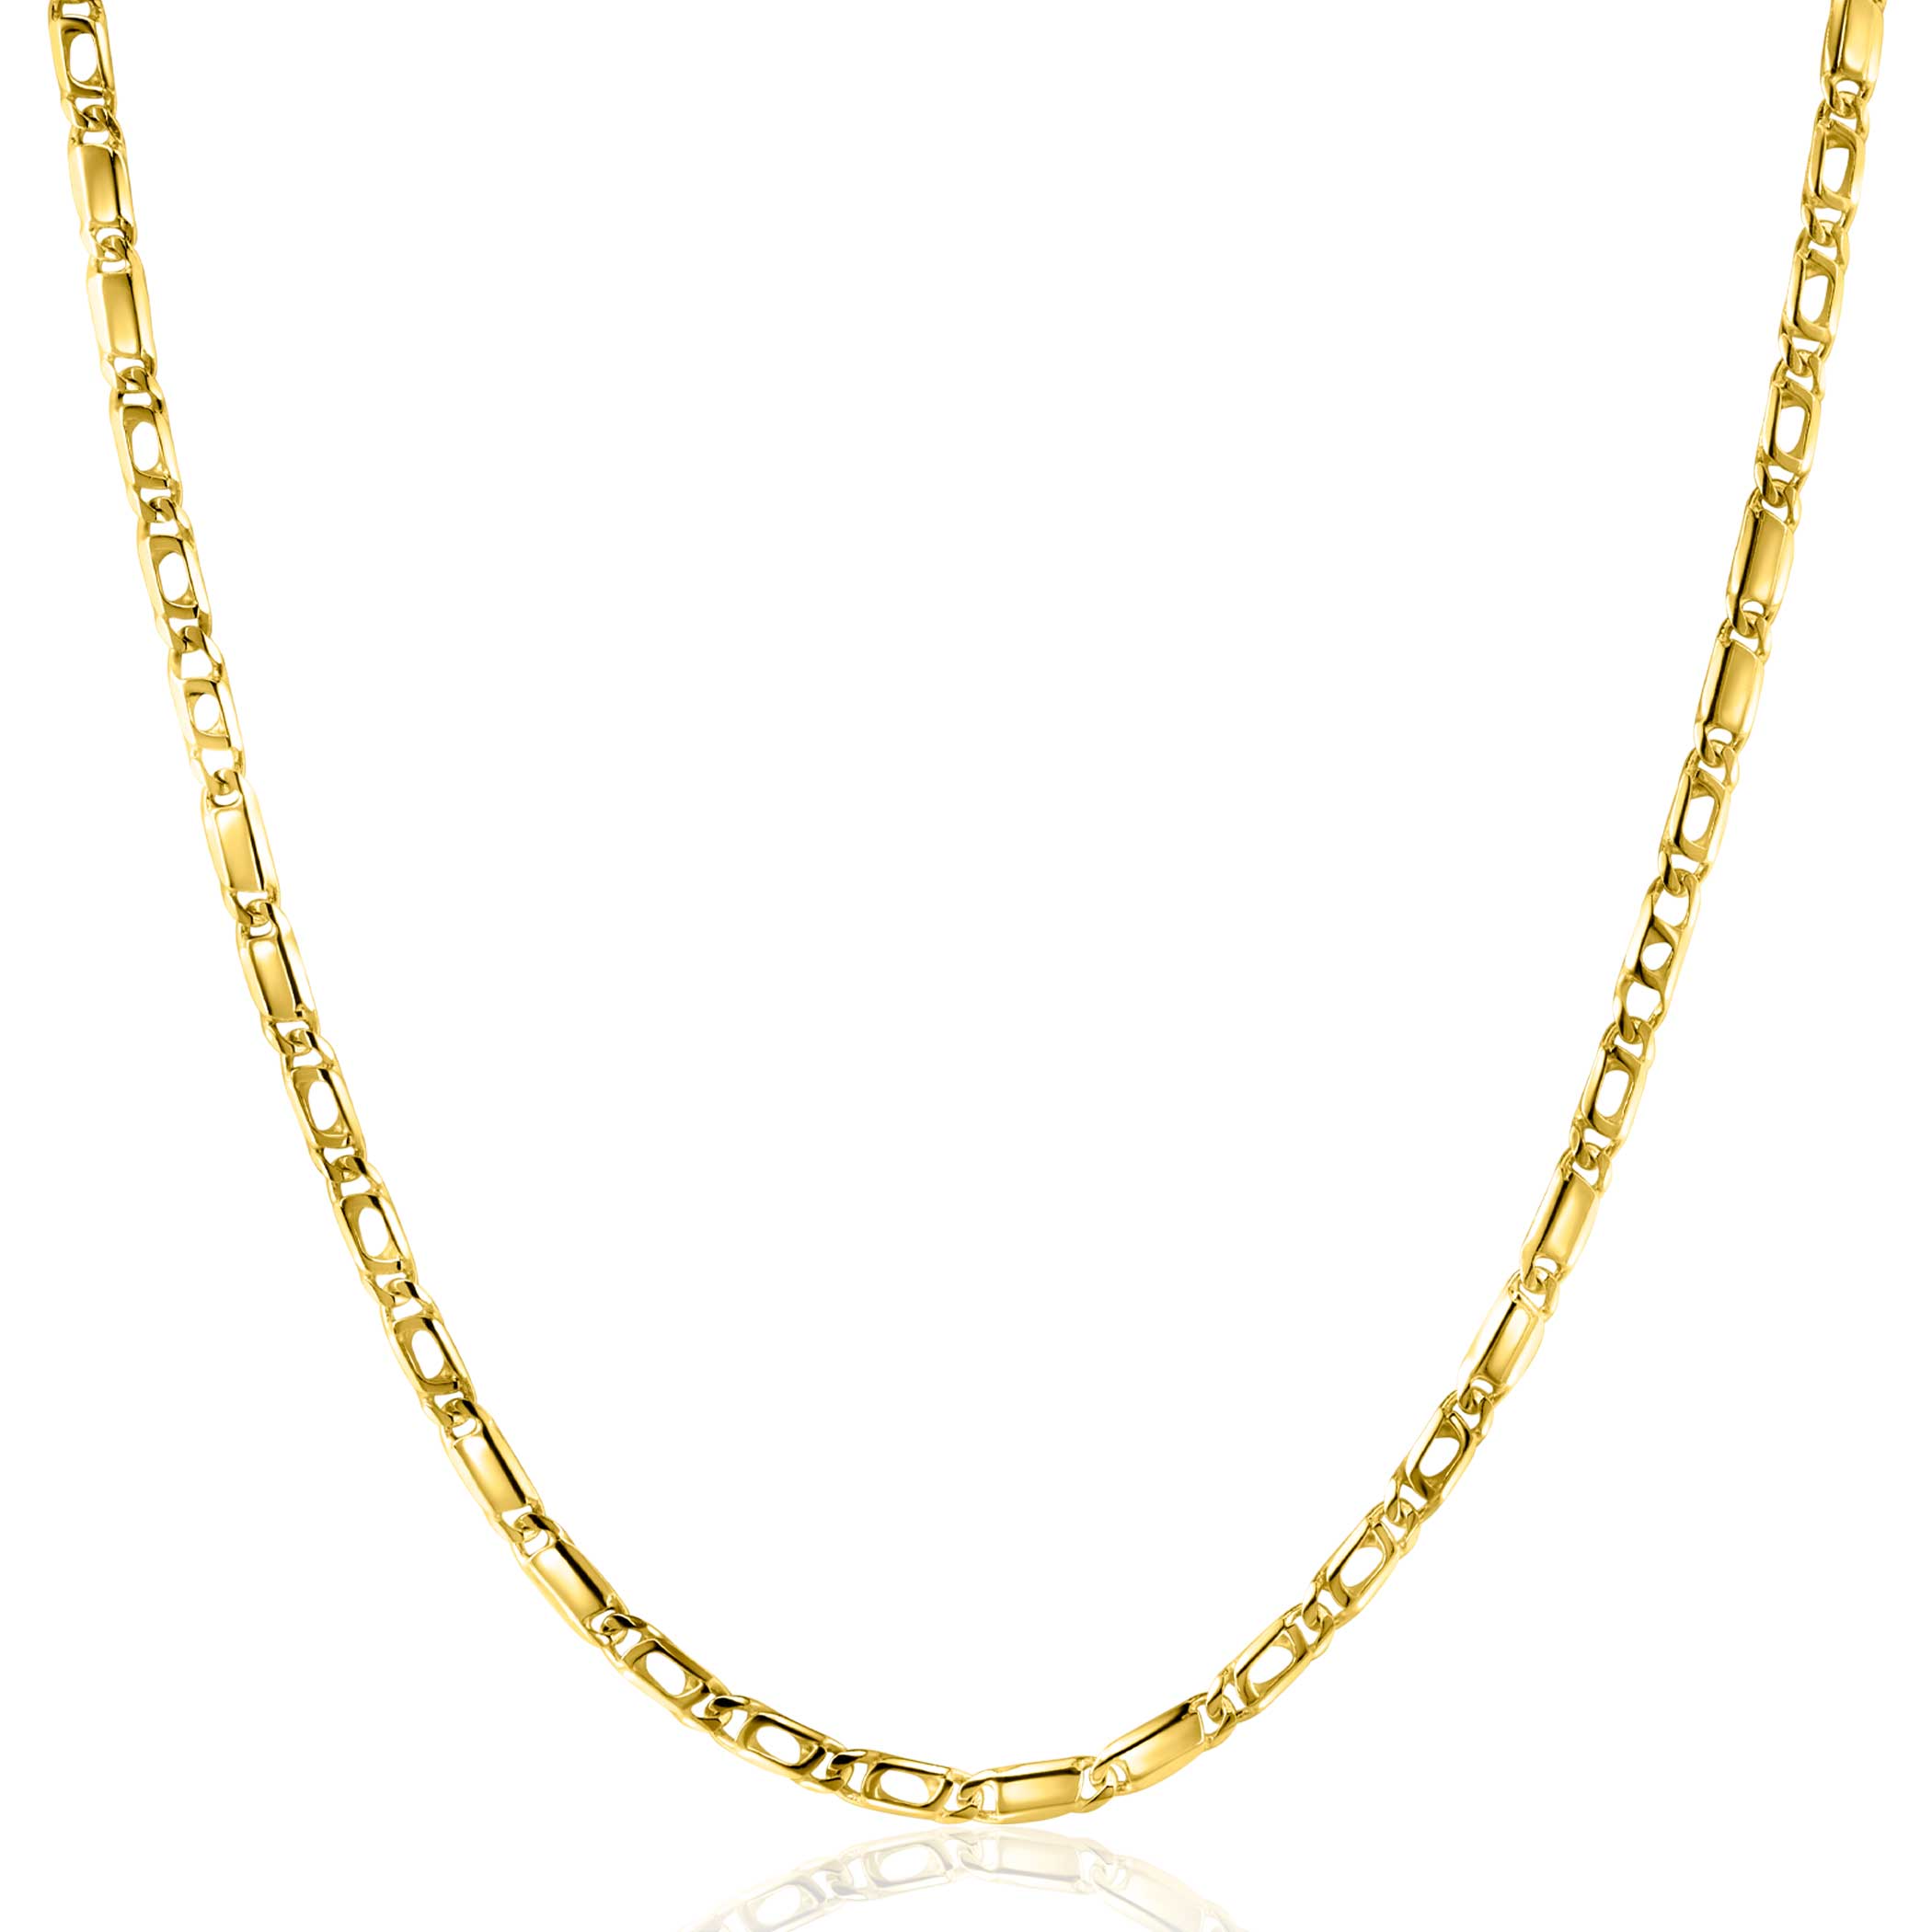 ZINZI Gold 14 carat solid gold necklace with hawk eye links and shiny plates, 2.6mm wide, 41-43cm ZGC499
